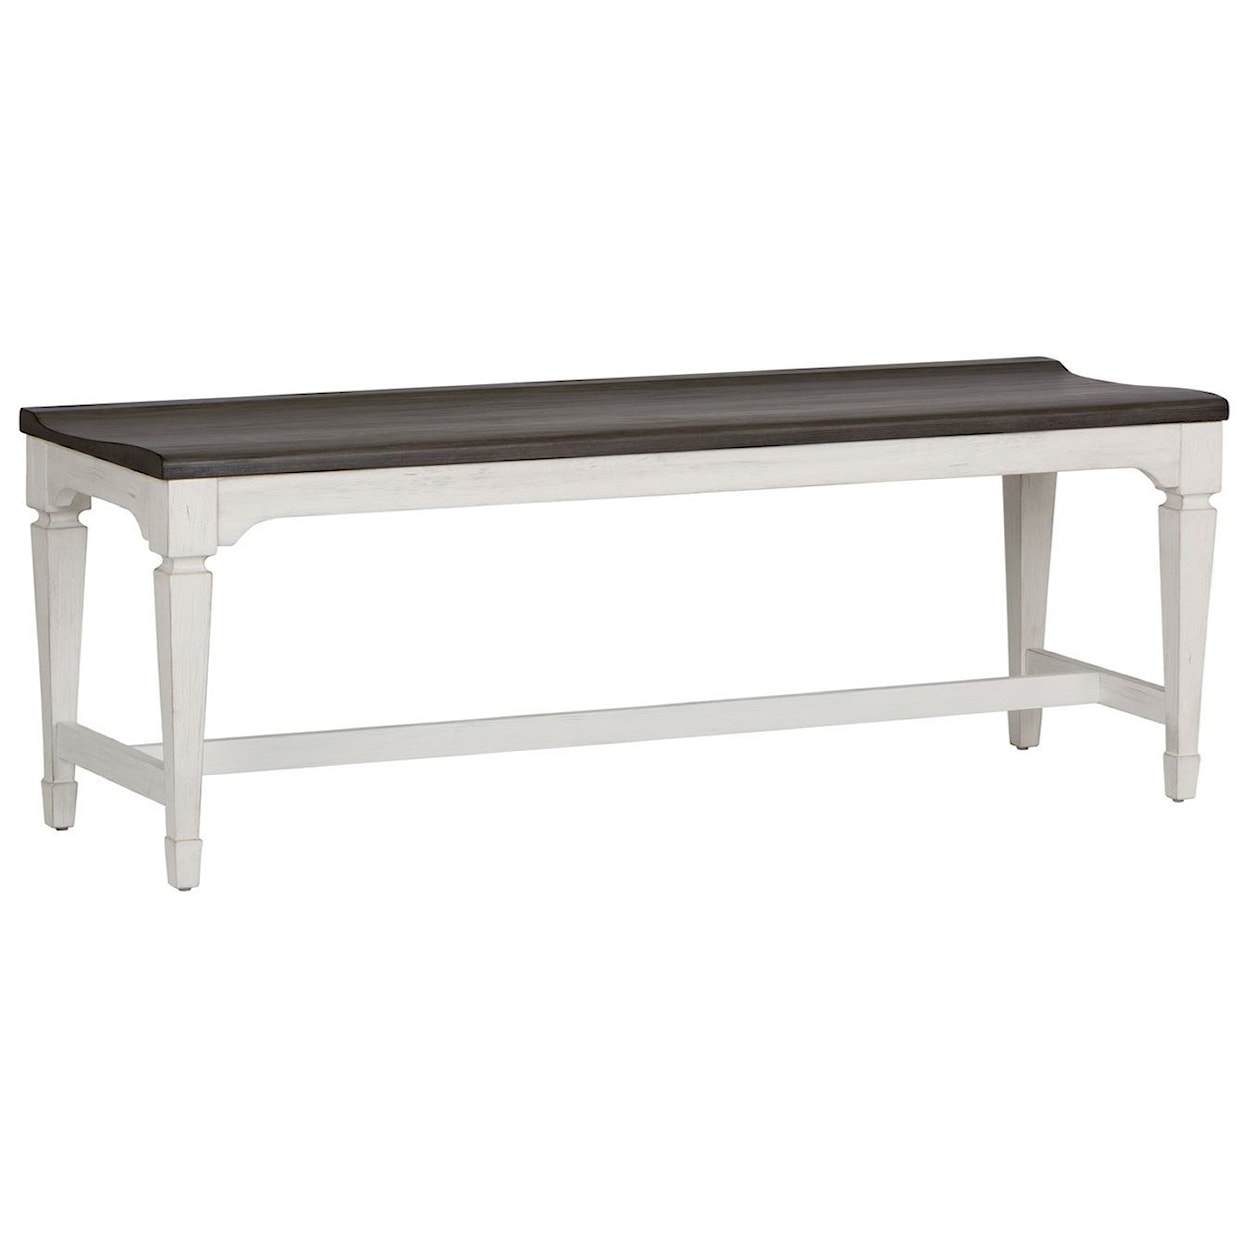 Freedom Furniture Allyson Park Dining Bench